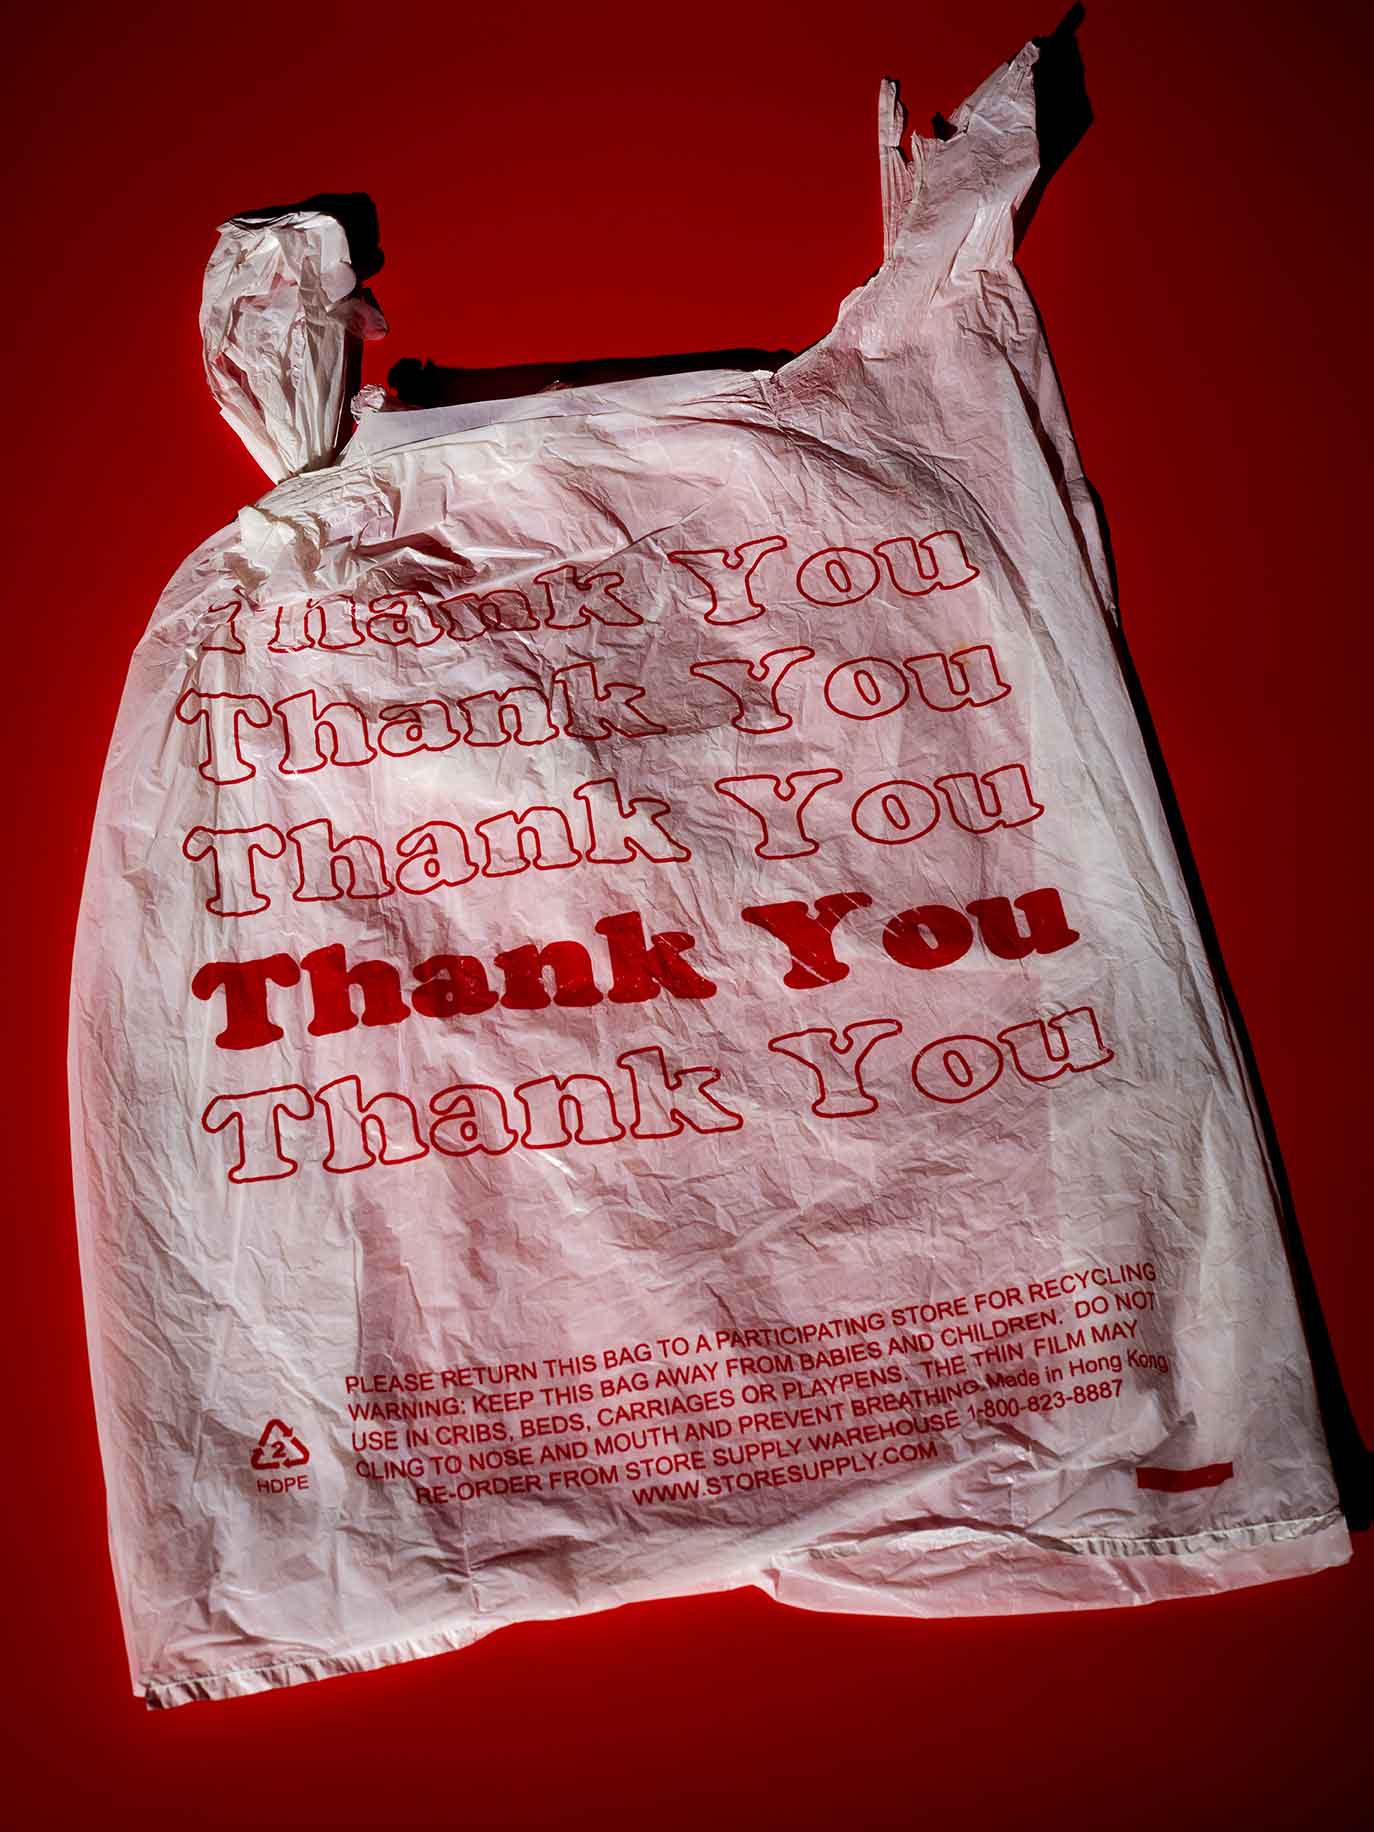 Medium Thank You Smiley Paper Bags 100 - Store Supply Warehouse